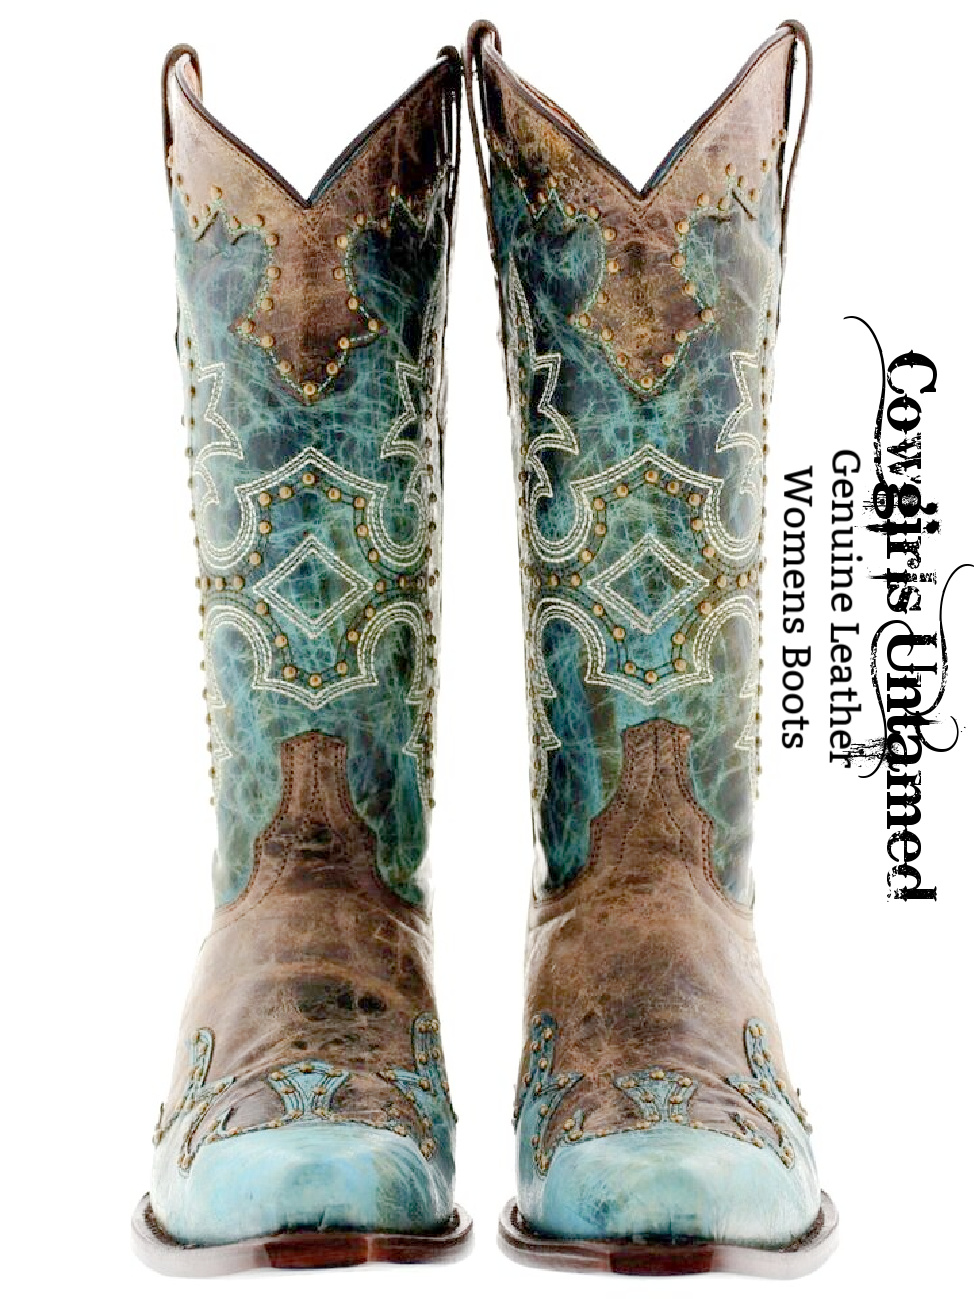 COWGIRL STYLE BOOTS Bronze Studded & Embroidered Brown Turquoise Genuine Leather Western Boots SIZES 5-11